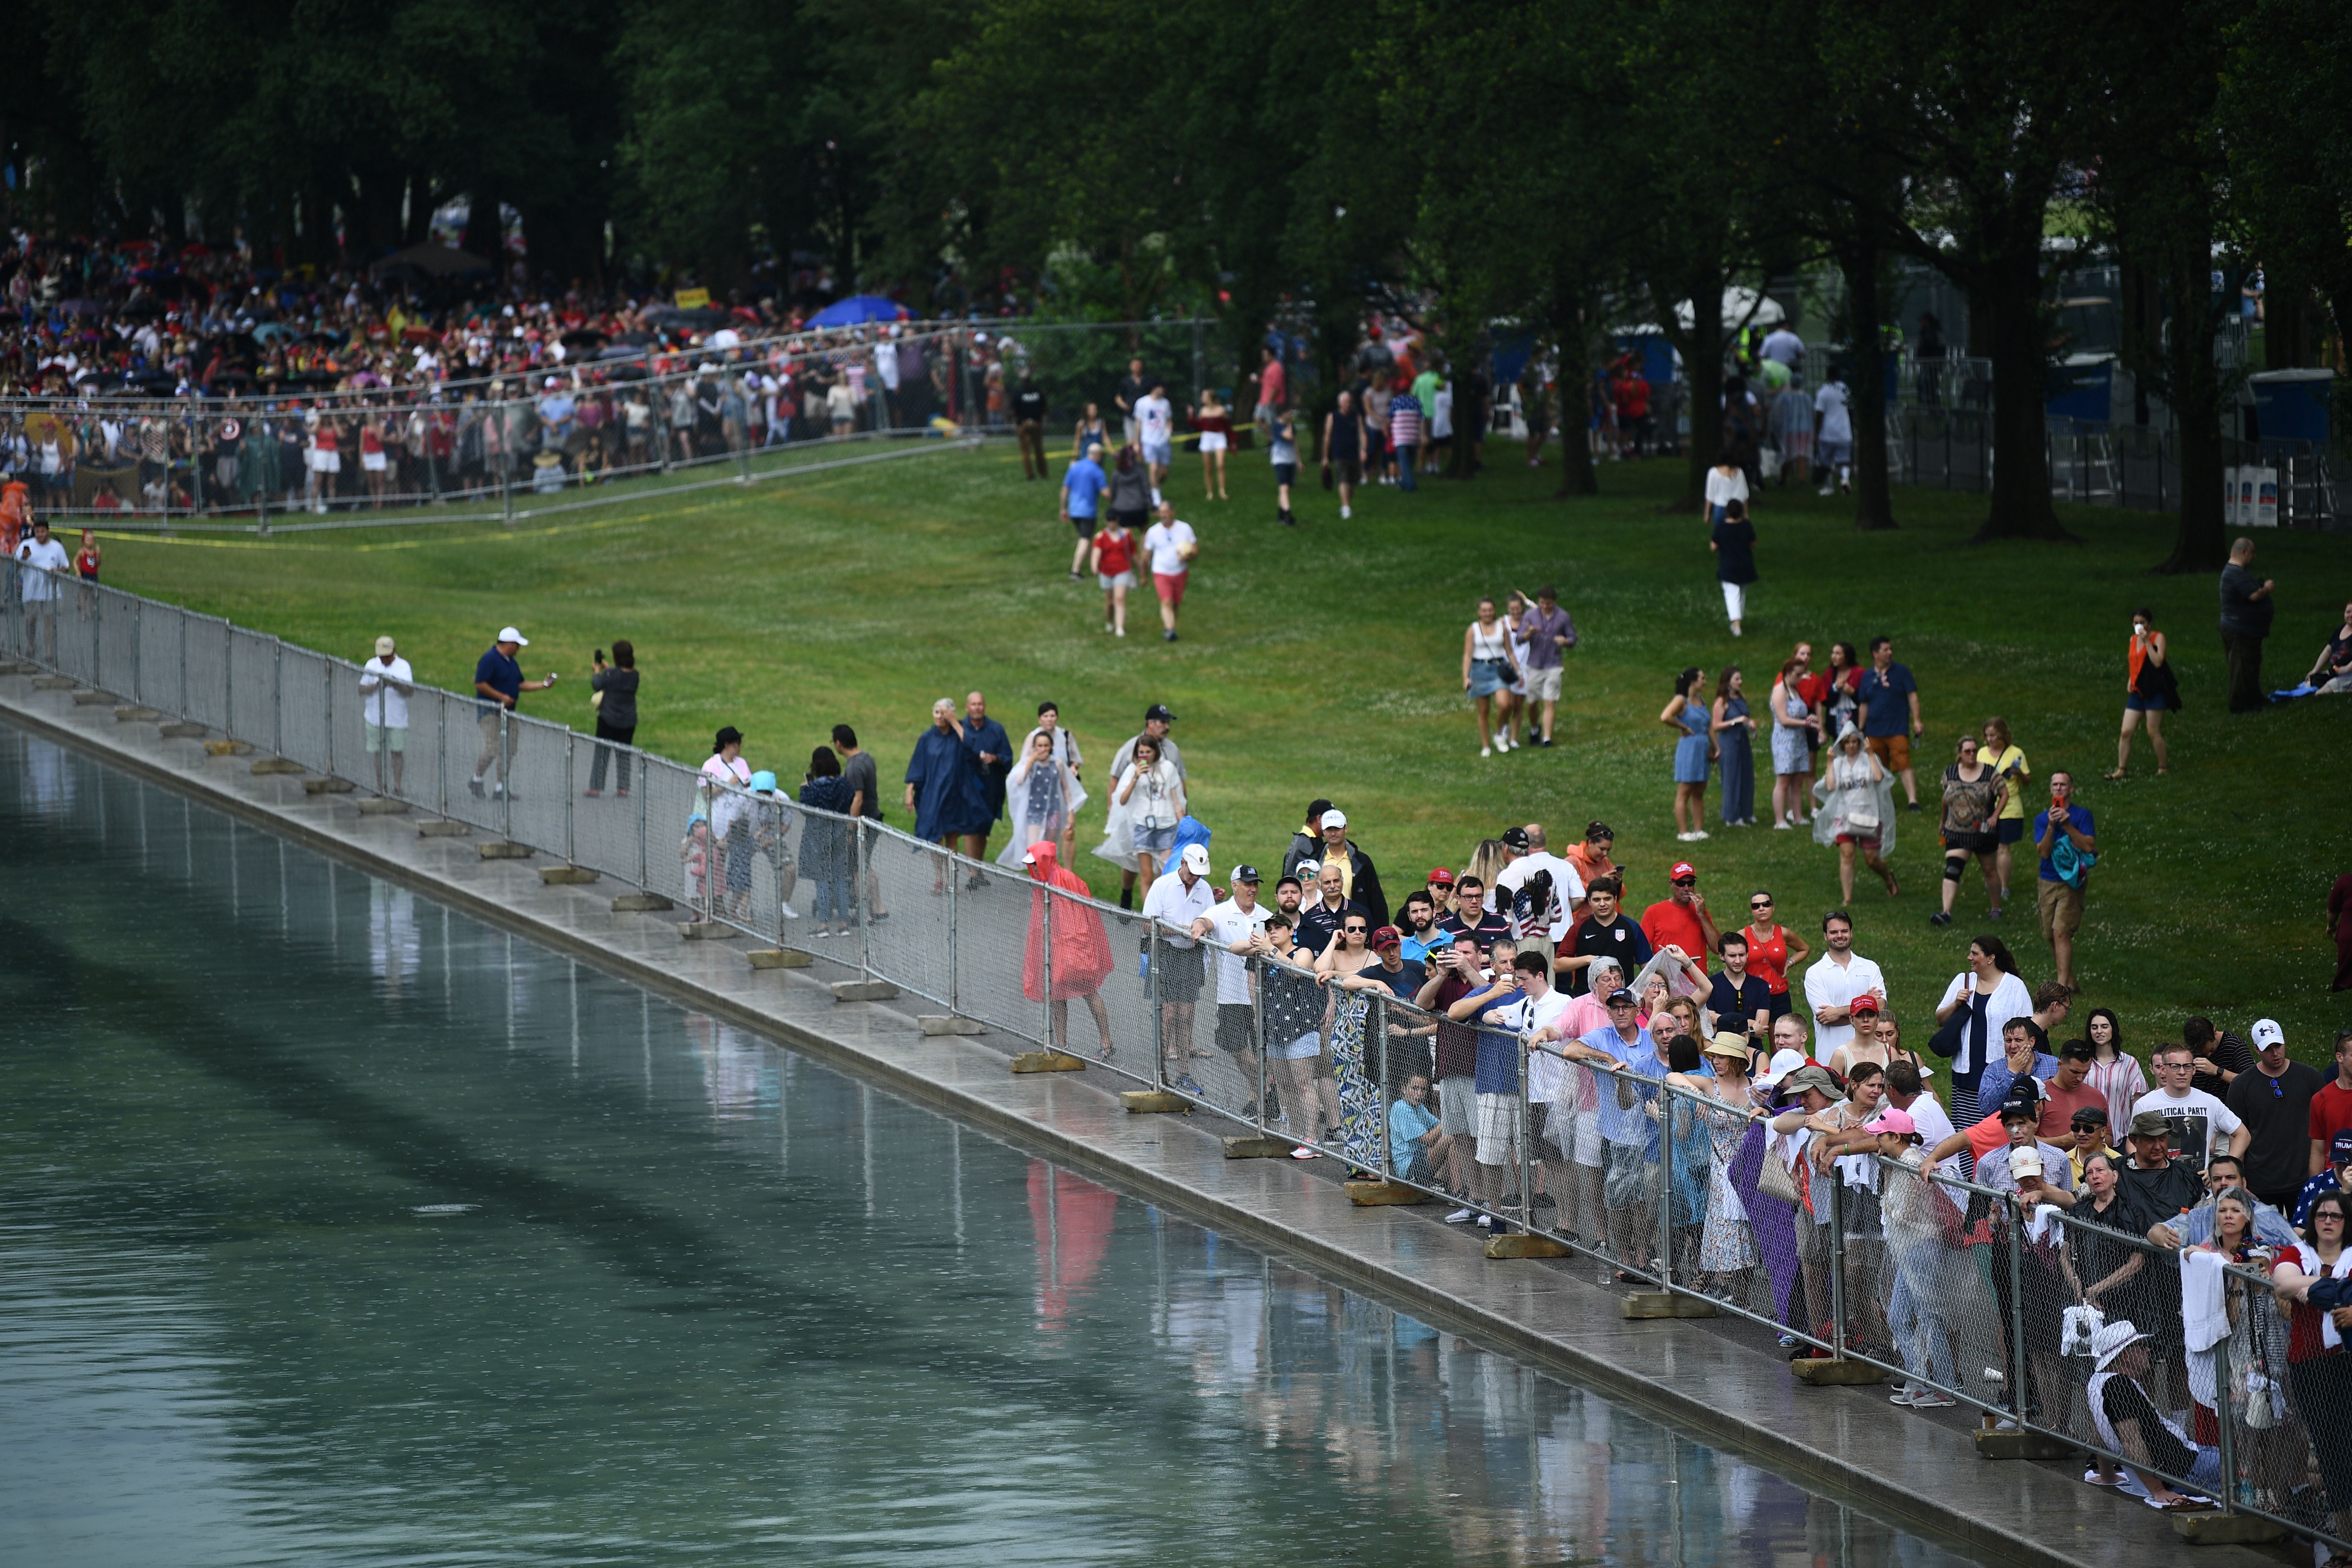 Crowds gathered in the back end of the VIP section after areas alongside the Reflecting Pool open to the general public had already been filled. (BRENDAN SMIALOWSKI/AFP/Getty Images)